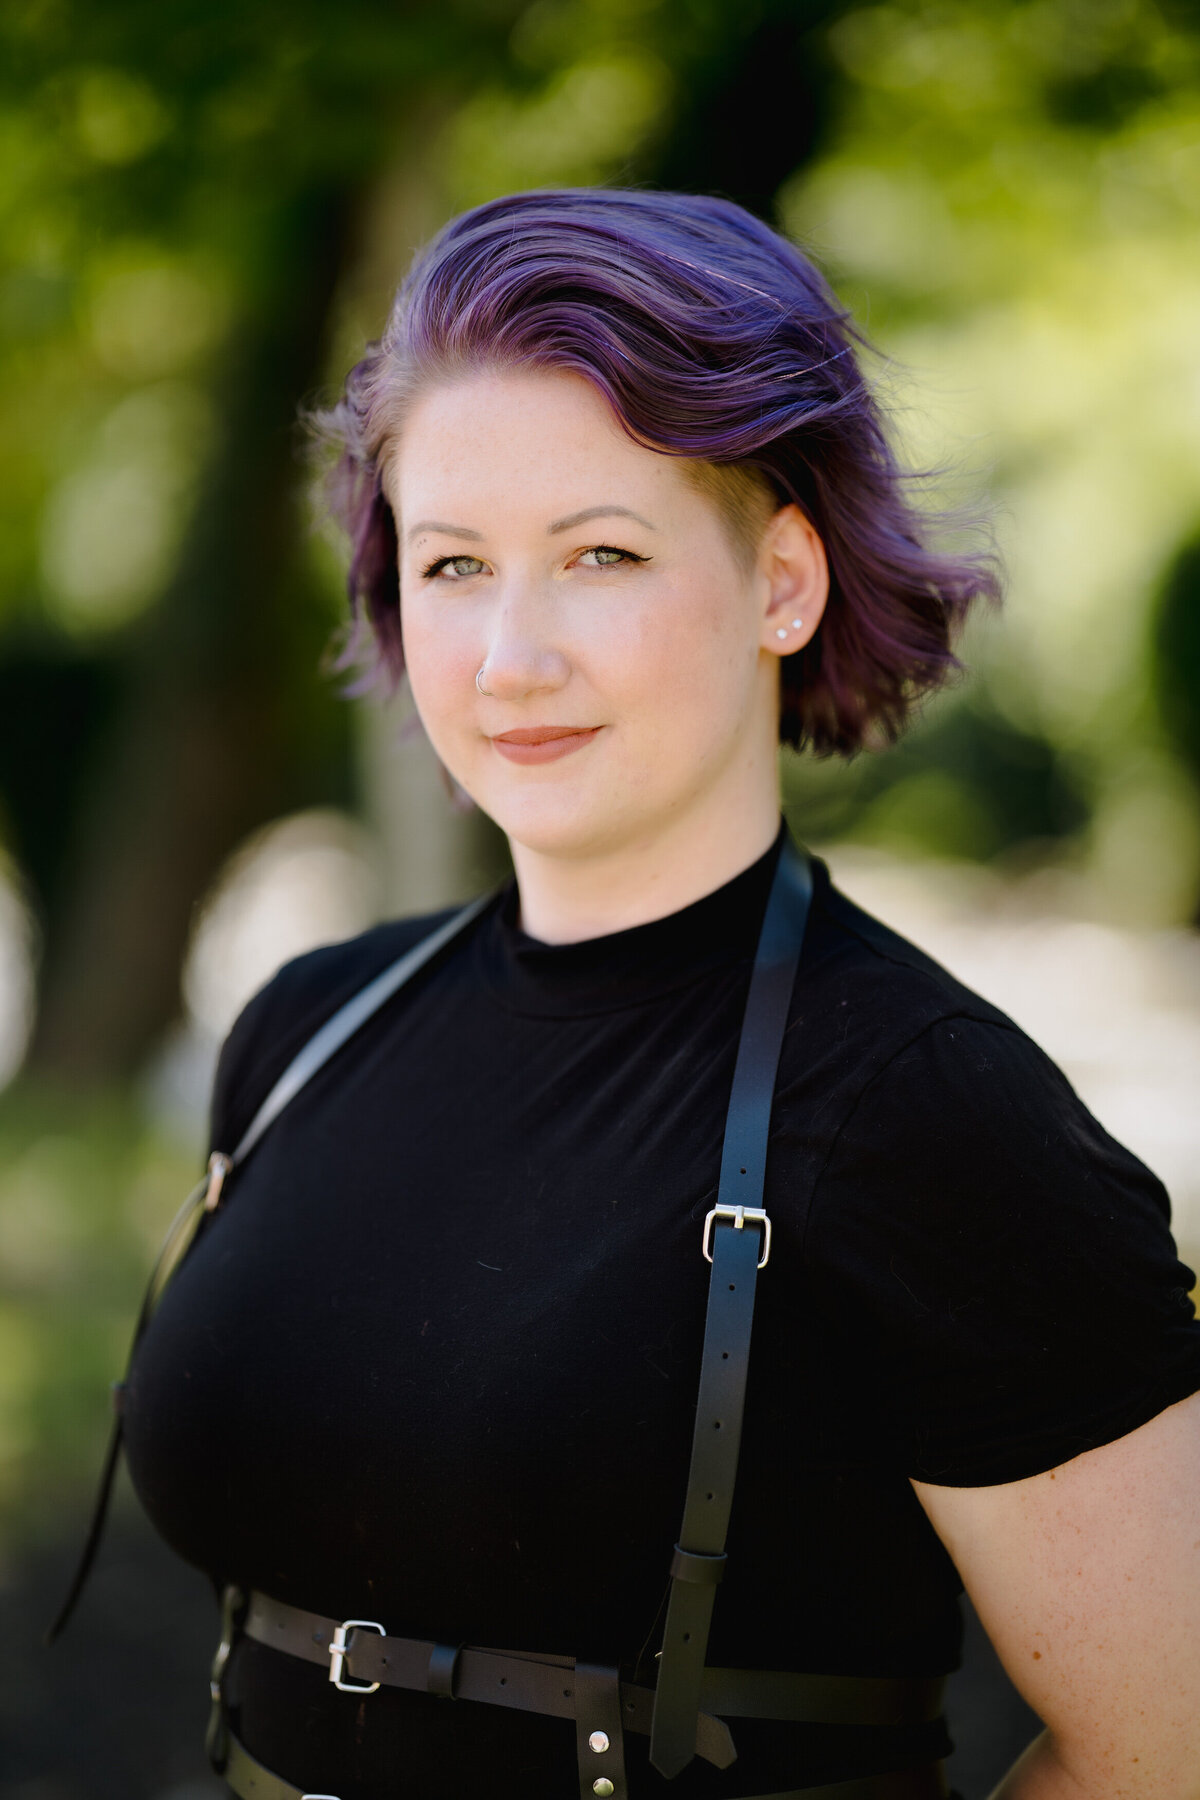 A woman with purple hair with a slight smile on her face.